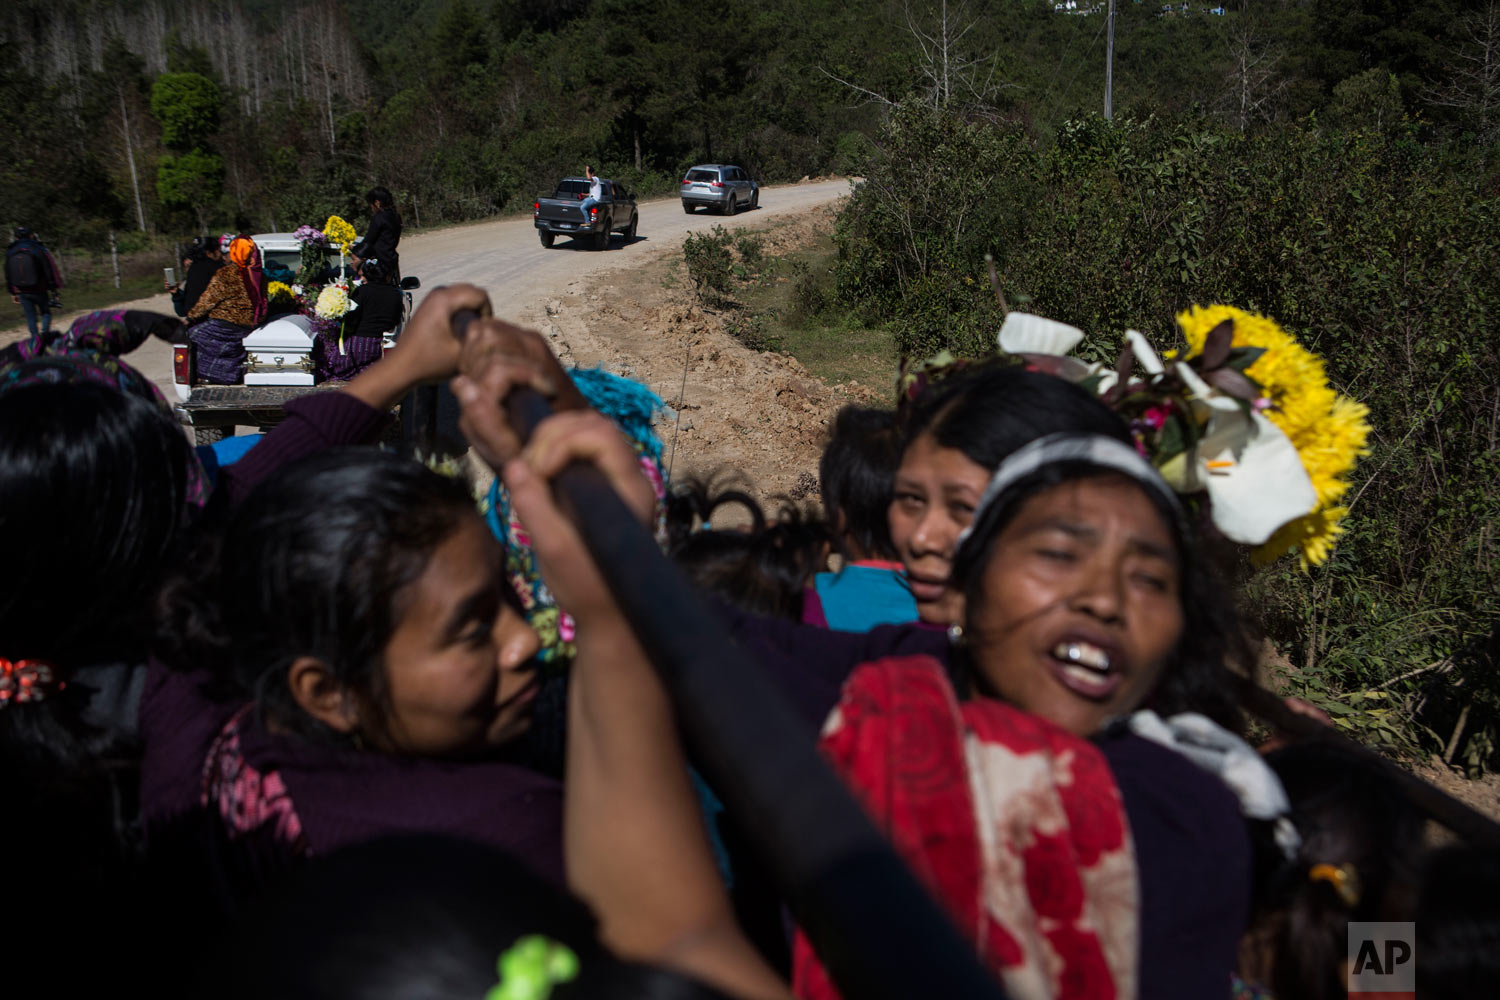  Women travel in the back of a truck during the funeral procession for Felipe Gomez Alonzo to the cemetery in Yalambojoch, Guatemala, Jan. 27, 2019. On Christmas Eve, the 8-year-old boy became the second Guatemalan child to die while in U.S. custody 